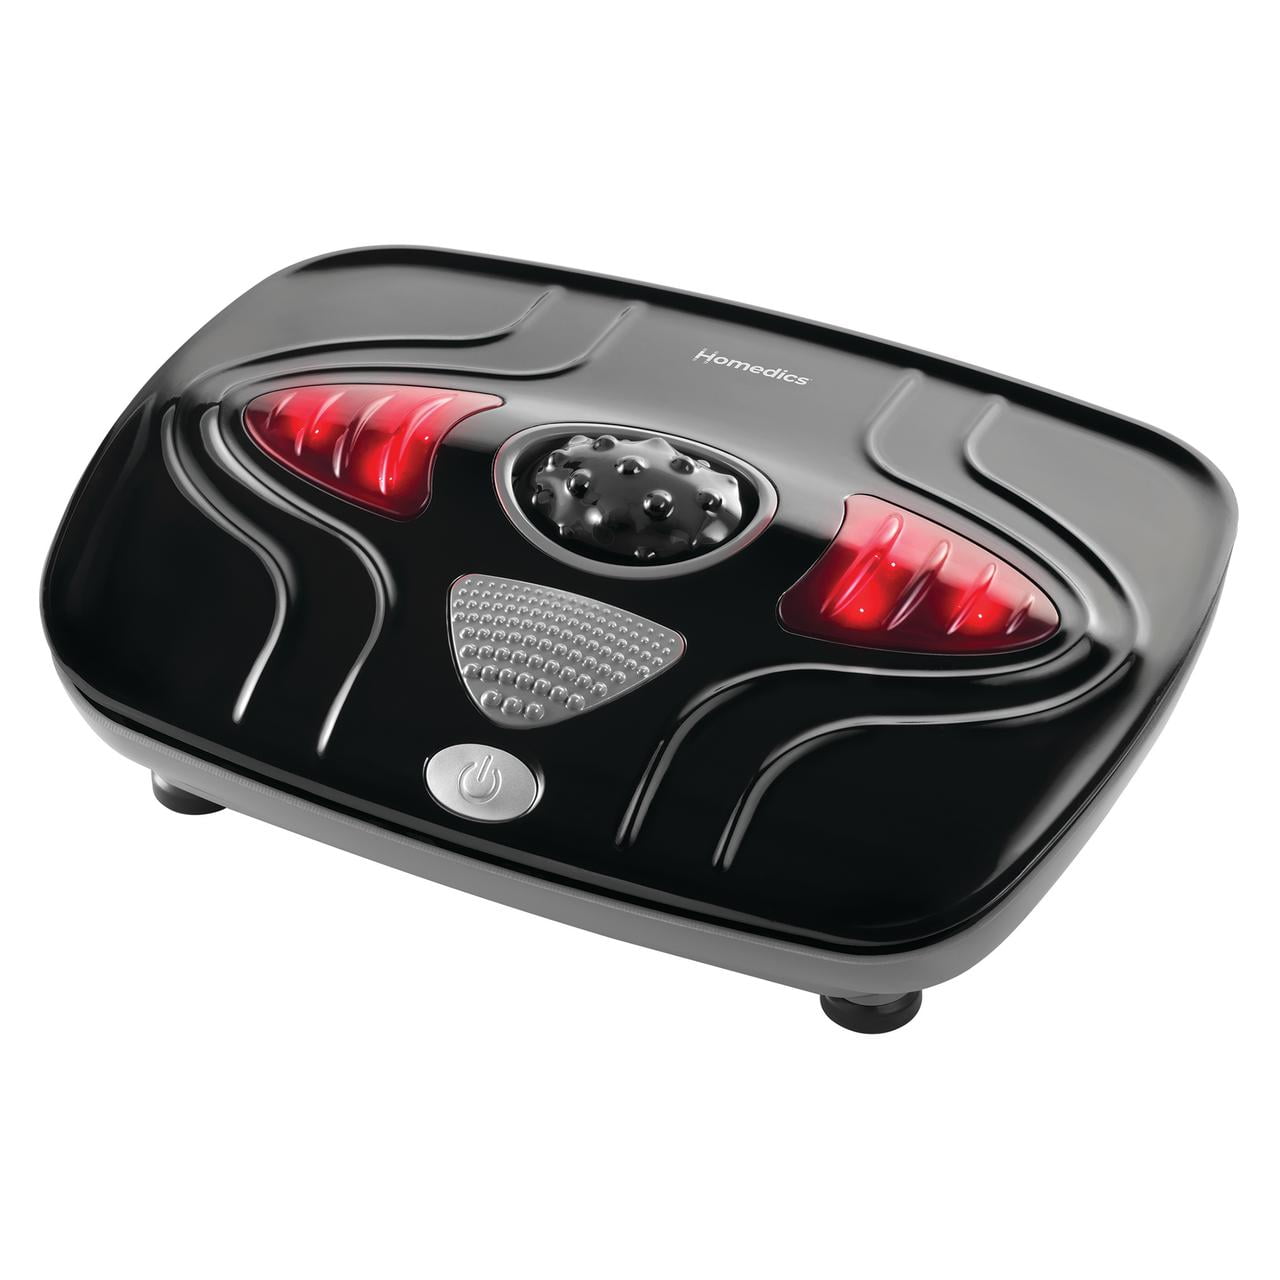 Homedics Vibration Foot Massager With Soothing Heat Black